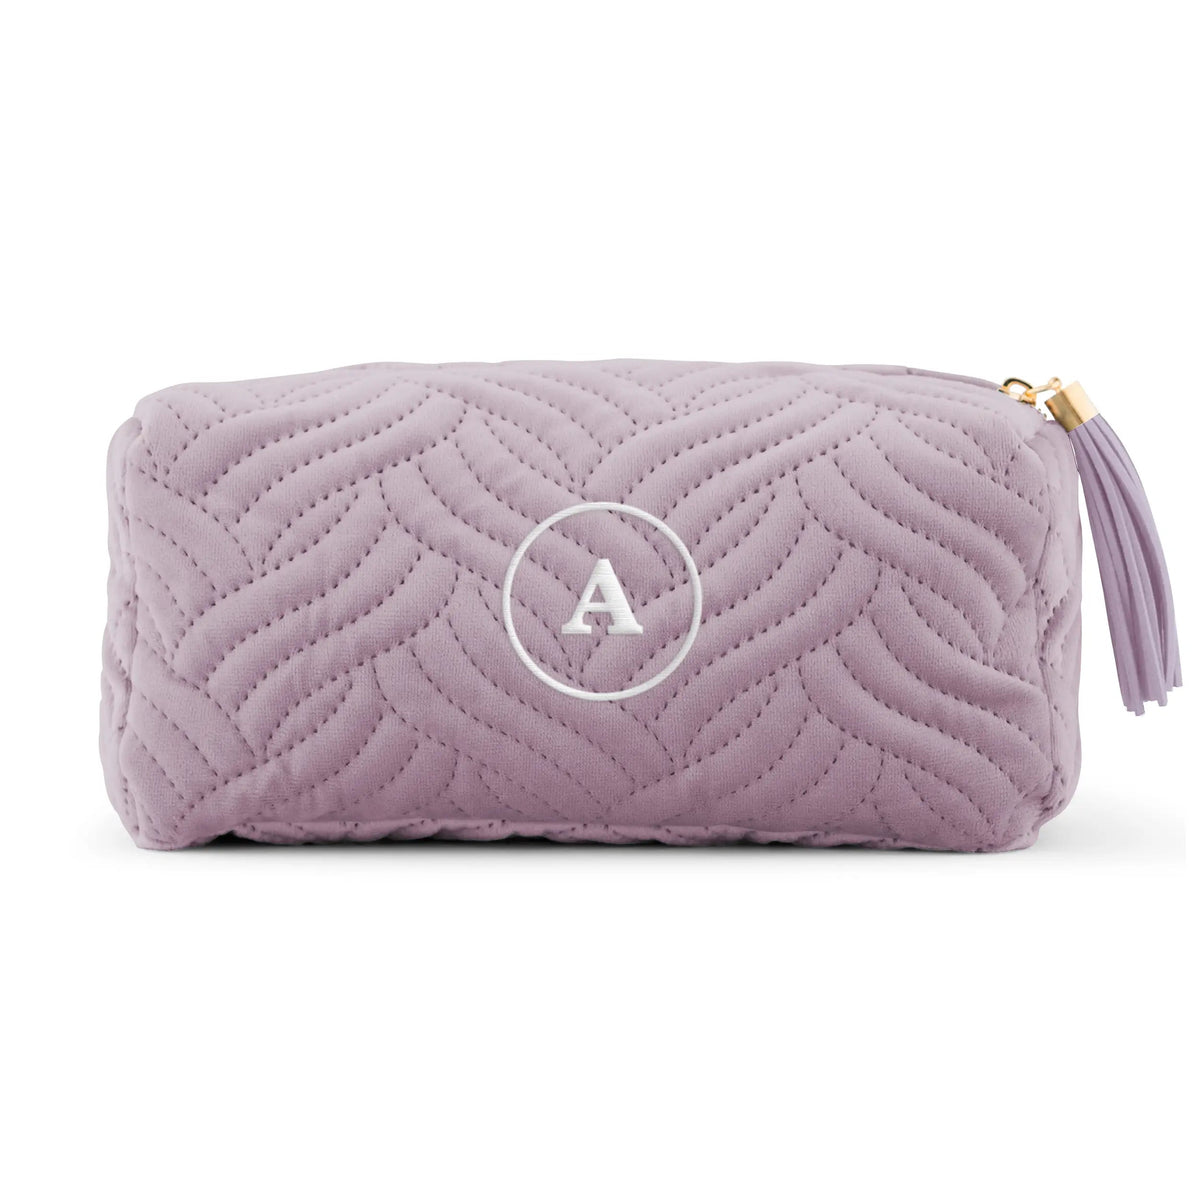 Bags & Luggage - Women's Bags - Cosmetic Bags & Cases Lavender Purple Velvet Quilted Makeup Bag